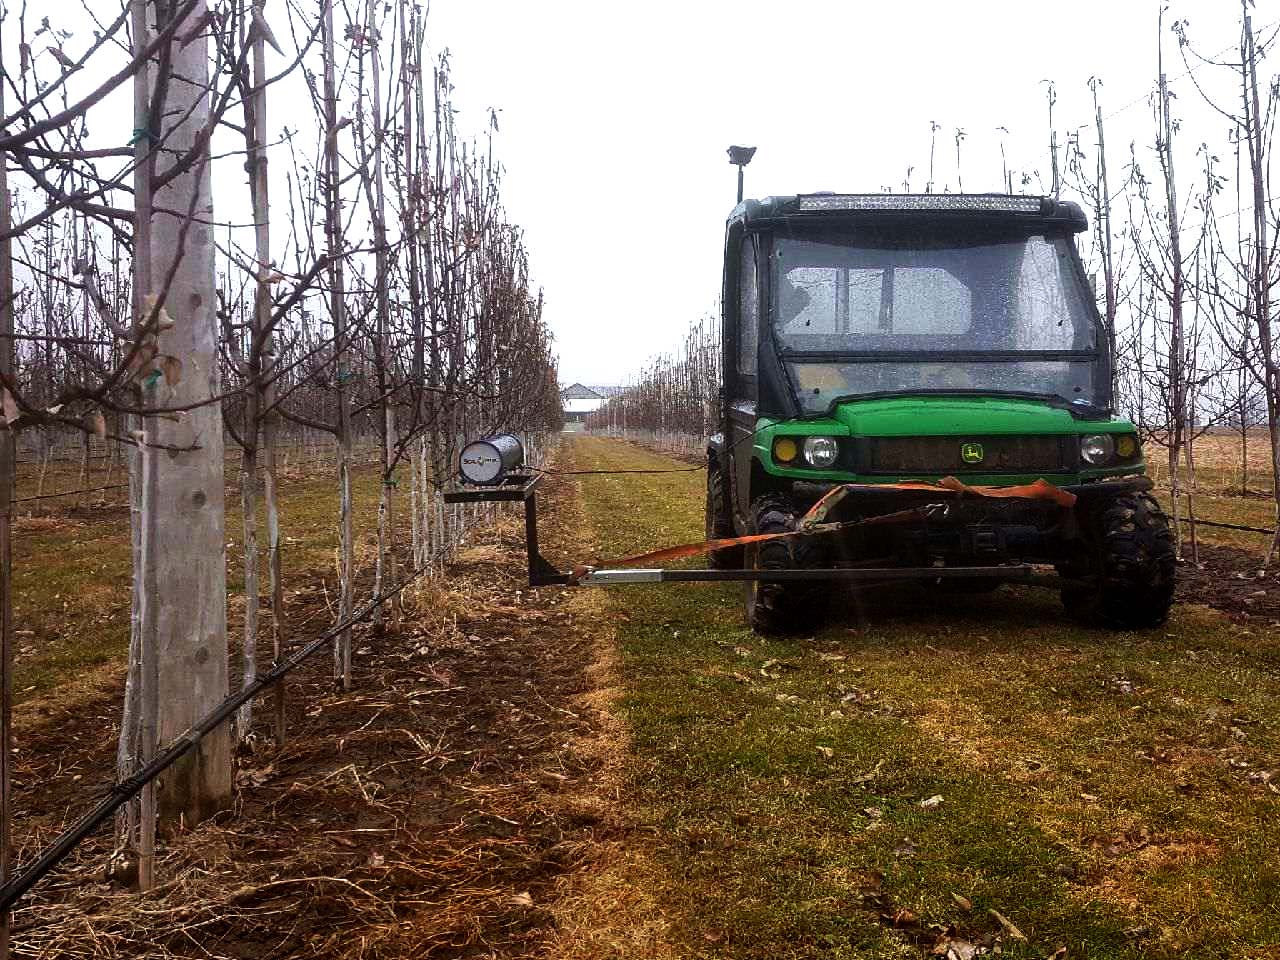 Using SoilOptix in an Orchard